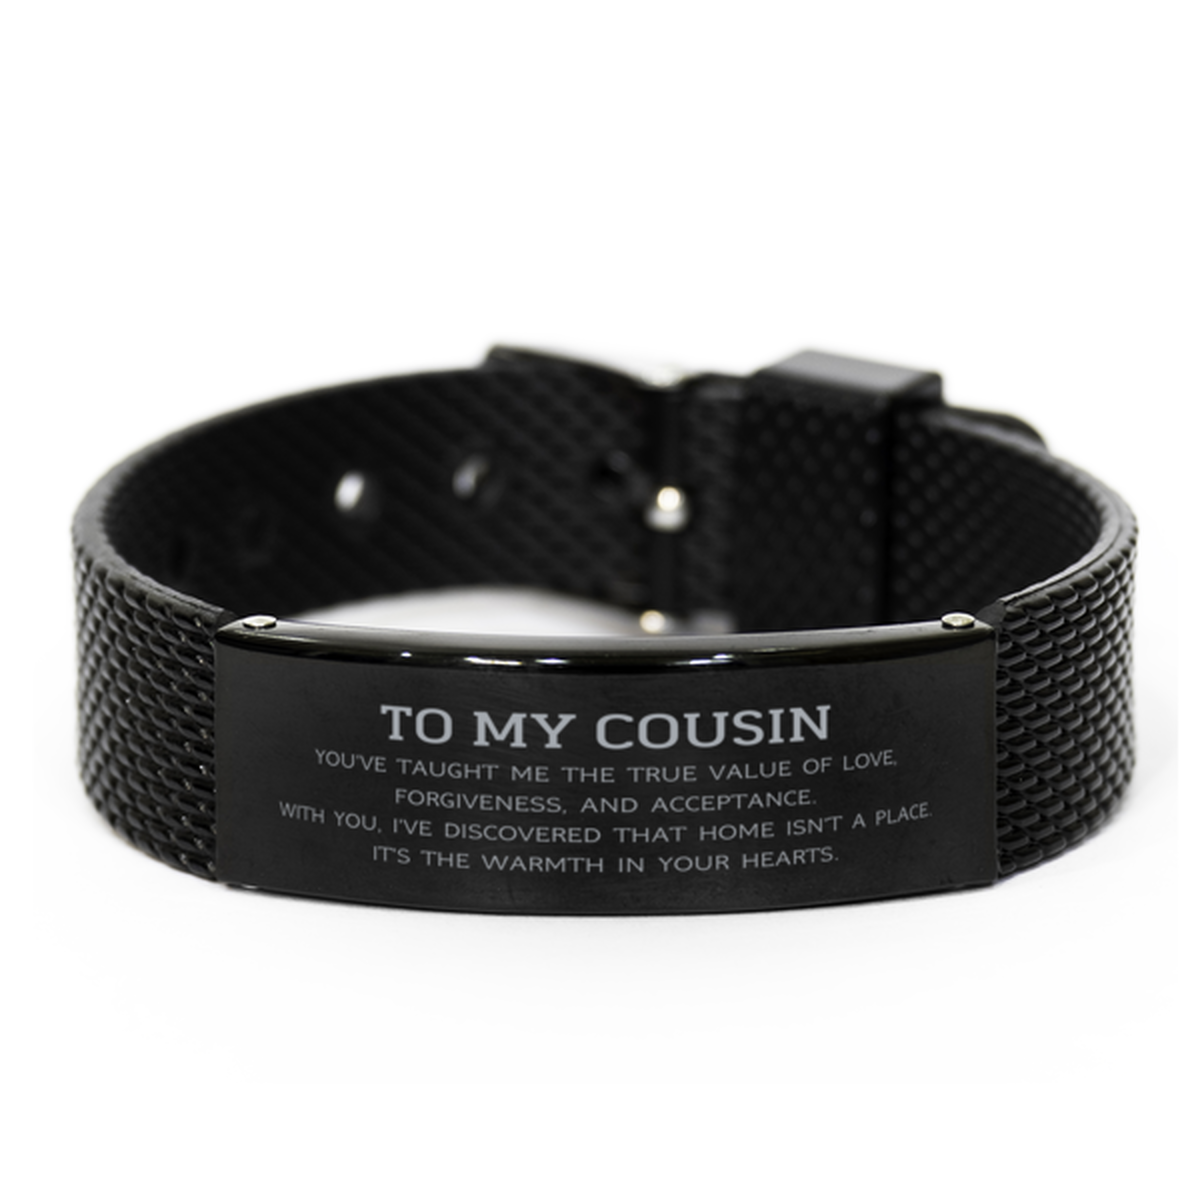 To My Cousin Gifts, You've taught me the true value of love, Thank You Gifts For Cousin, Birthday Black Shark Mesh Bracelet For Cousin